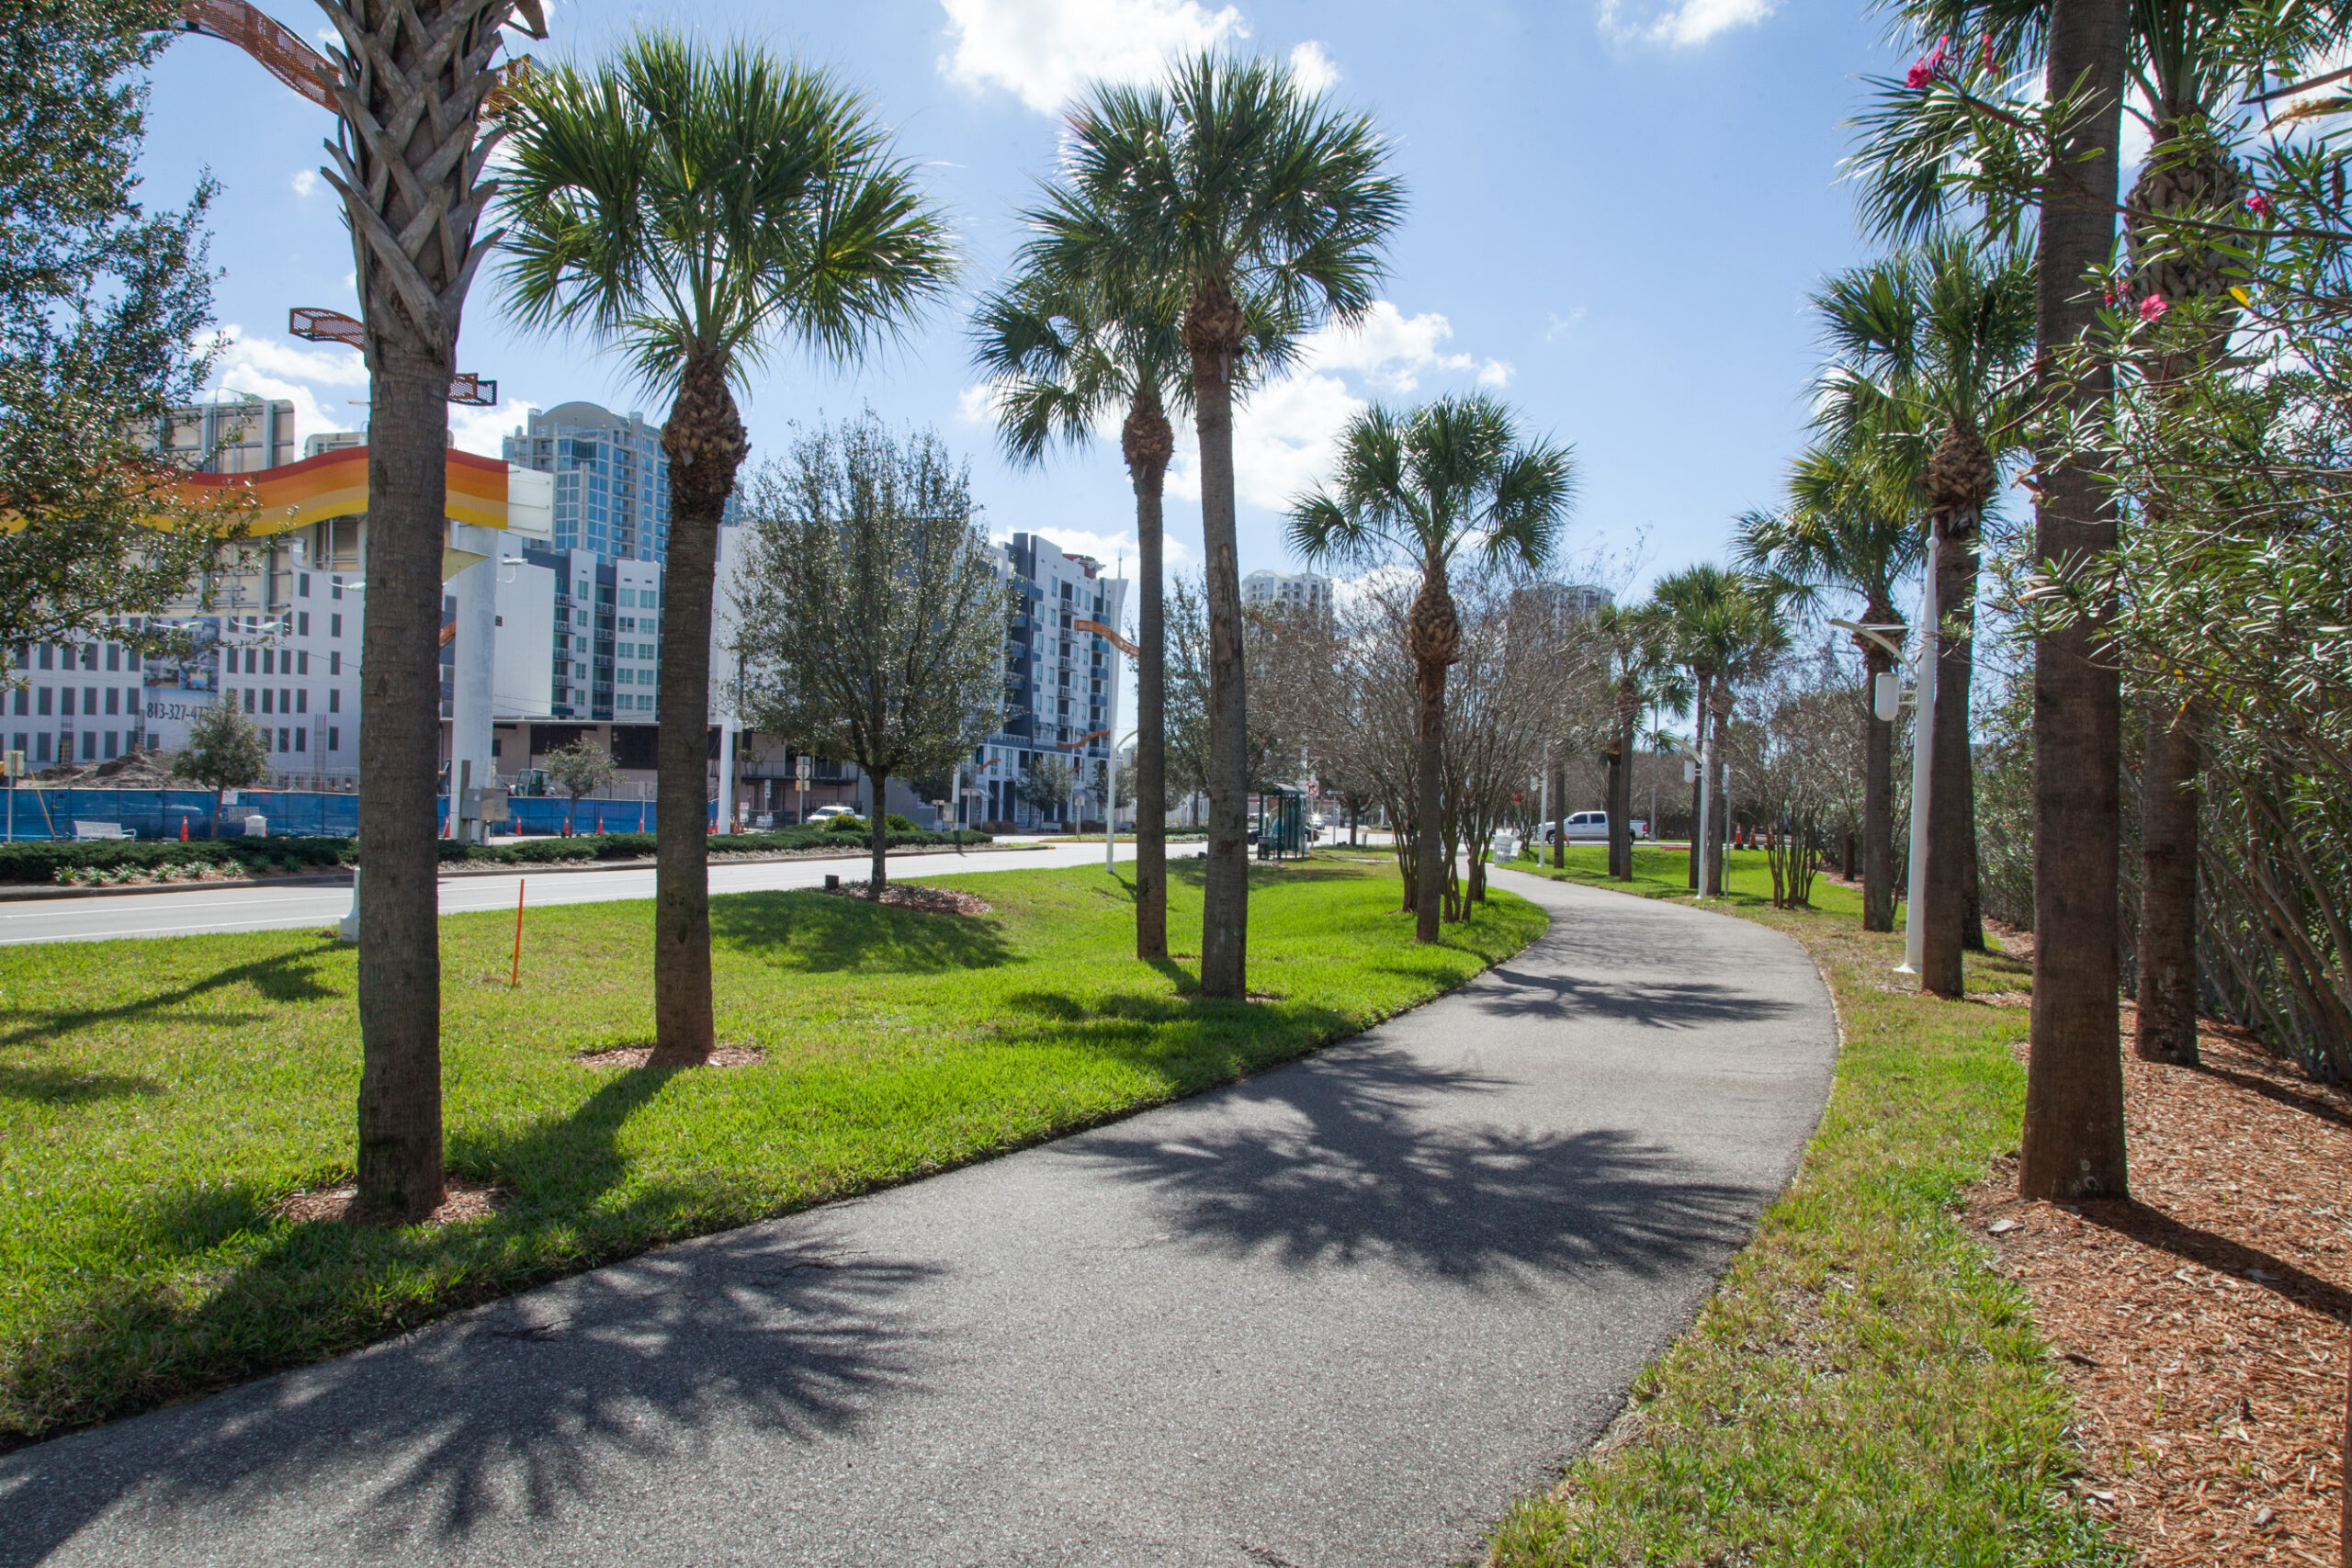 Downtown Tampa Holiday Adventures Await: Get there on the Selmon Greenway -  Tampa Hillsborough Expressway Authority